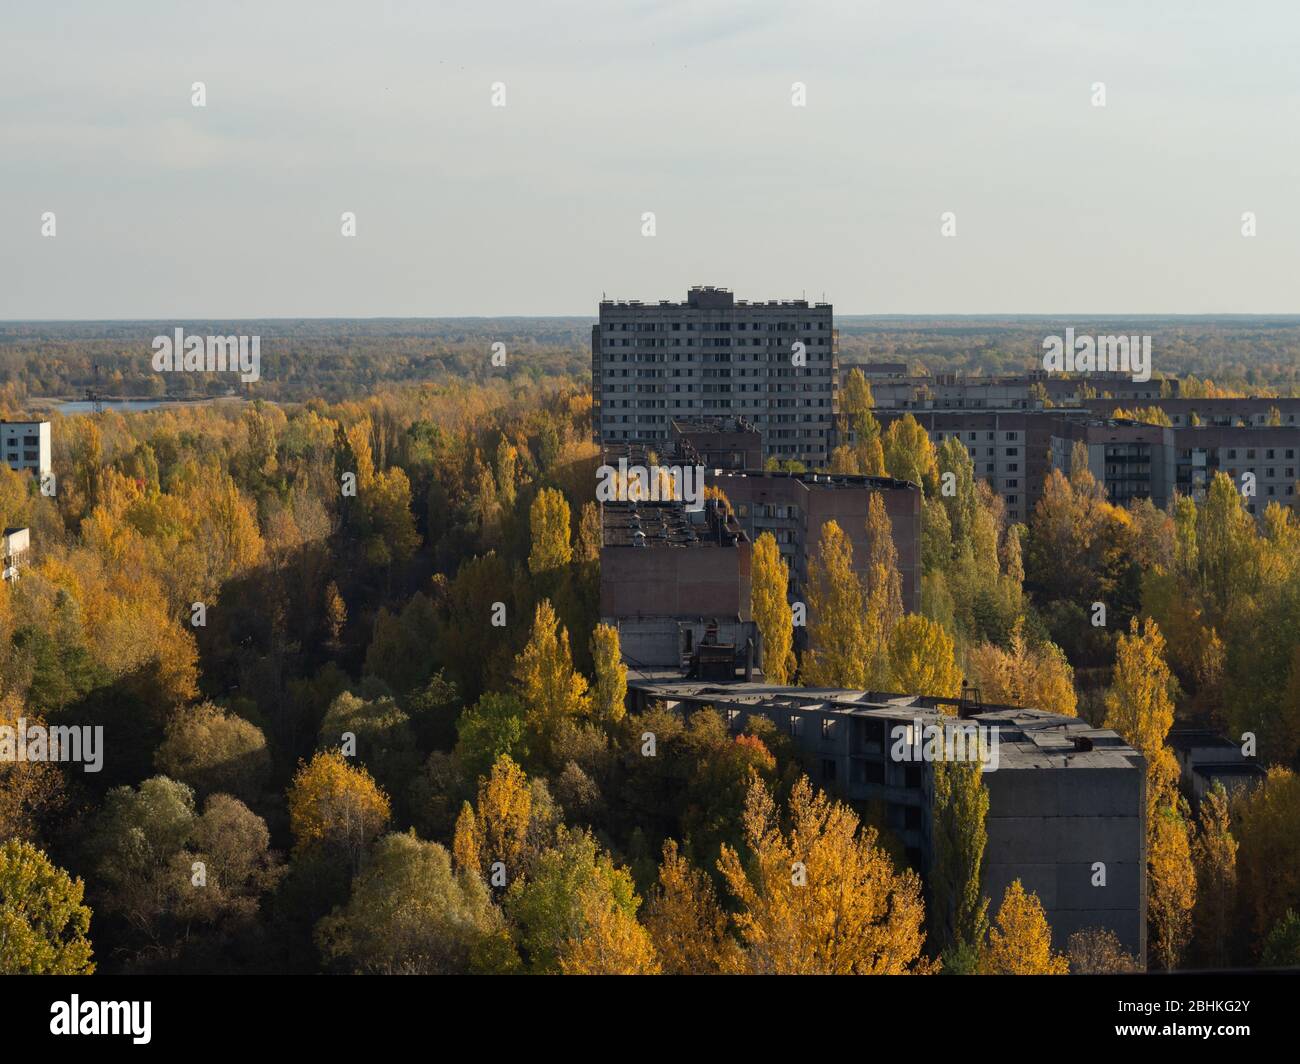 View from roof of ghost town Pripyat, post apocalyptic city, autumn season in Chernobyl exclusion zone, Ukraine Stock Photo